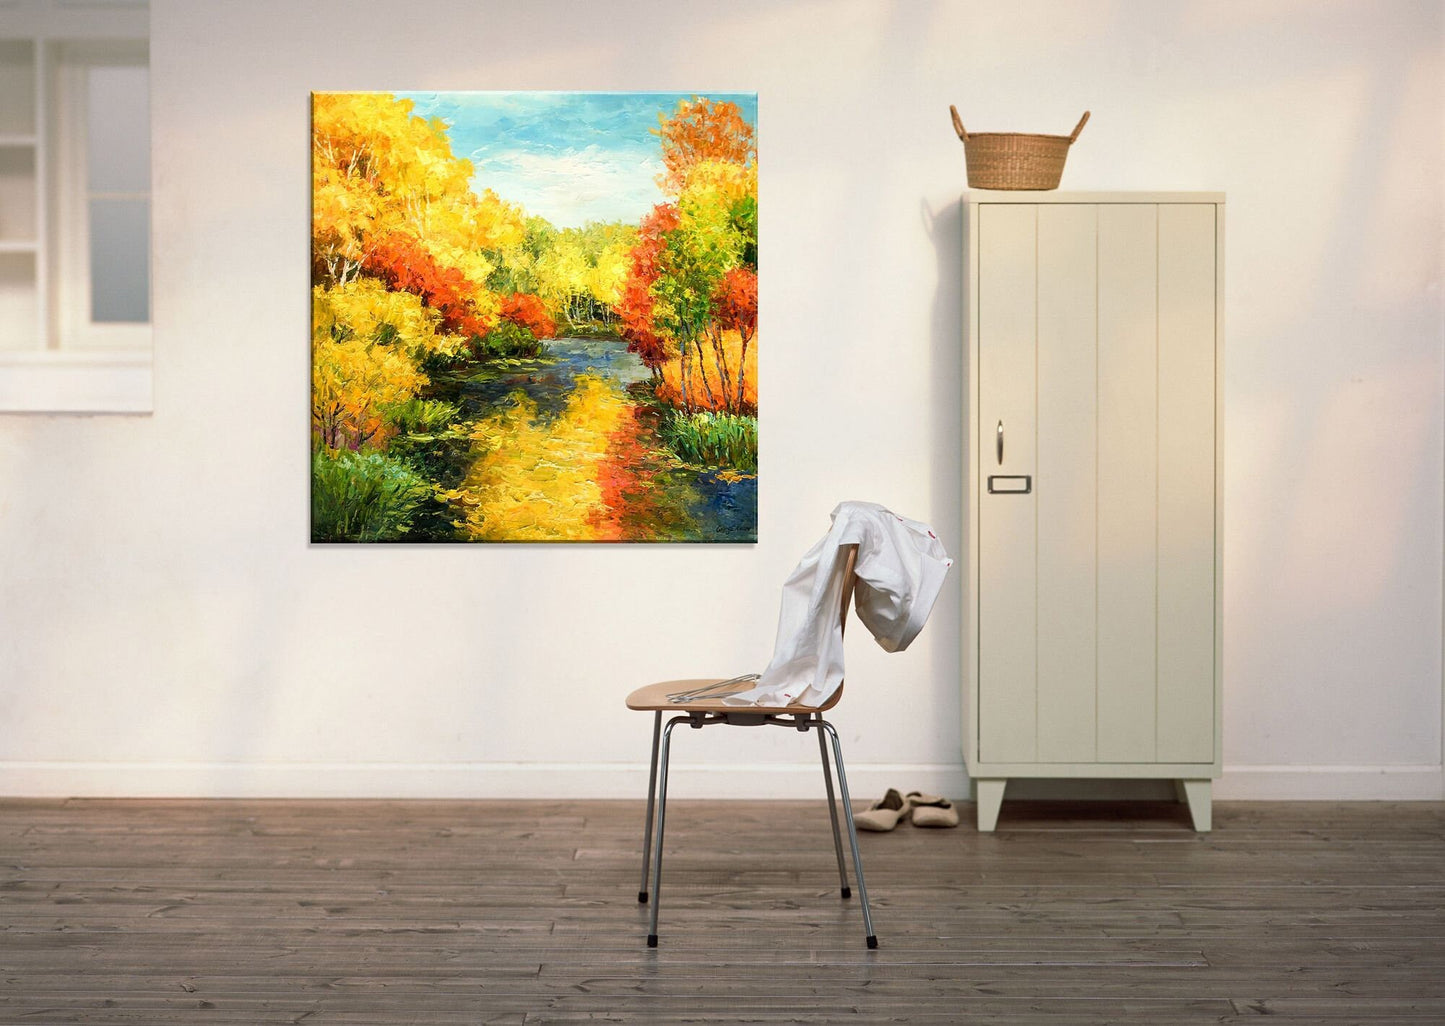 Get lost in the picturesque scene of Autumn Forest with this large canvas wall art- A stunning addition to your home decor